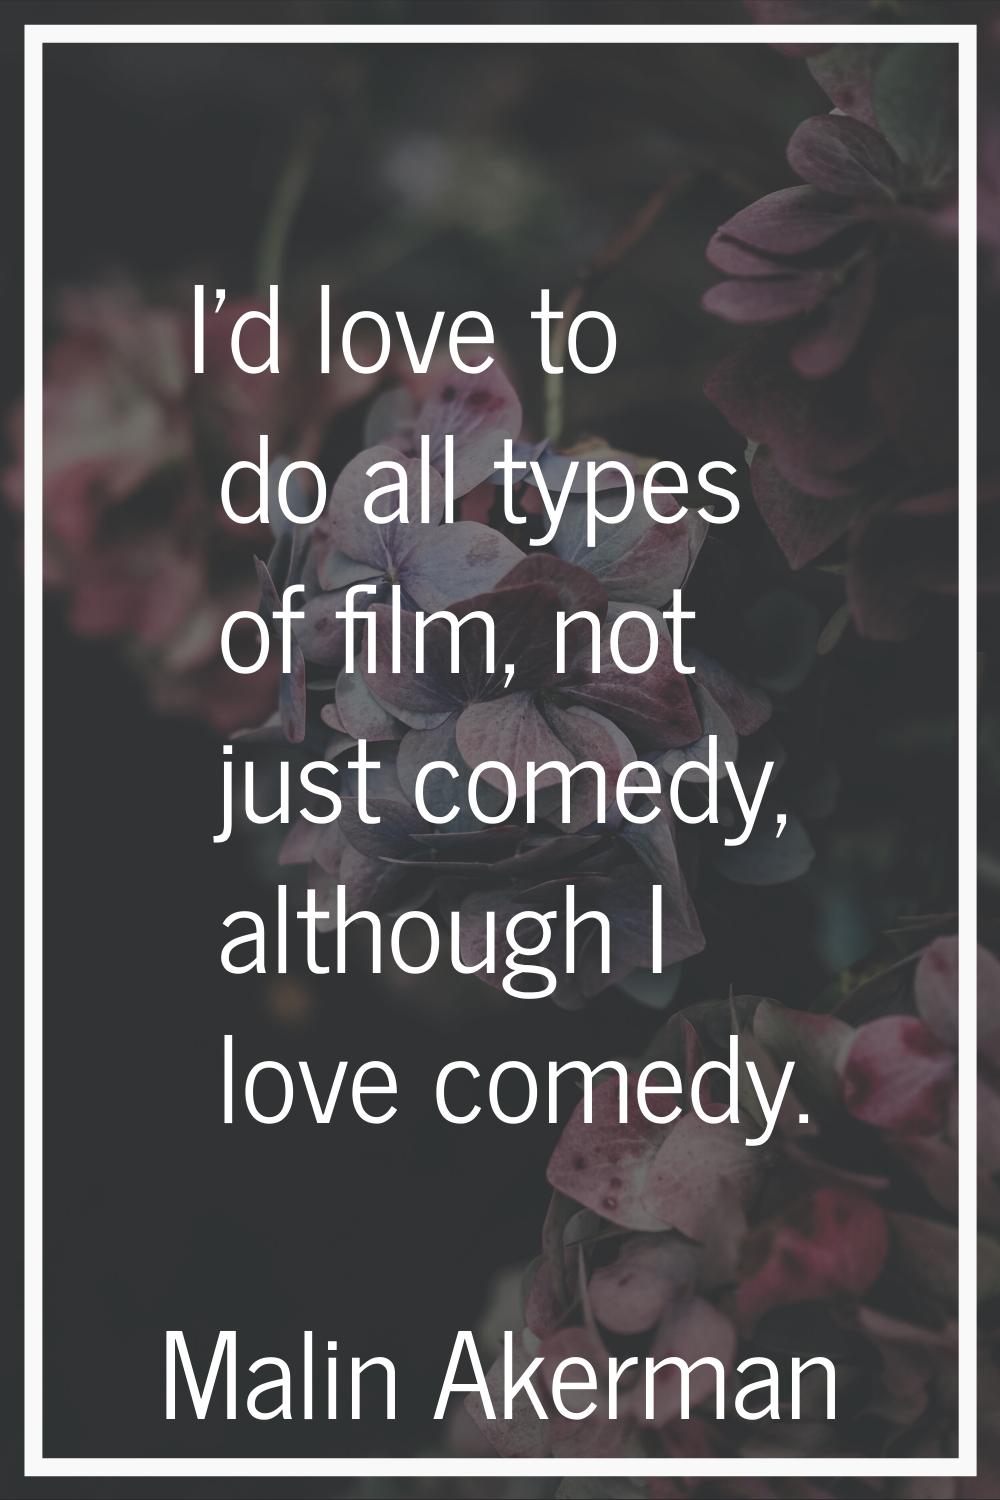 I'd love to do all types of film, not just comedy, although I love comedy.